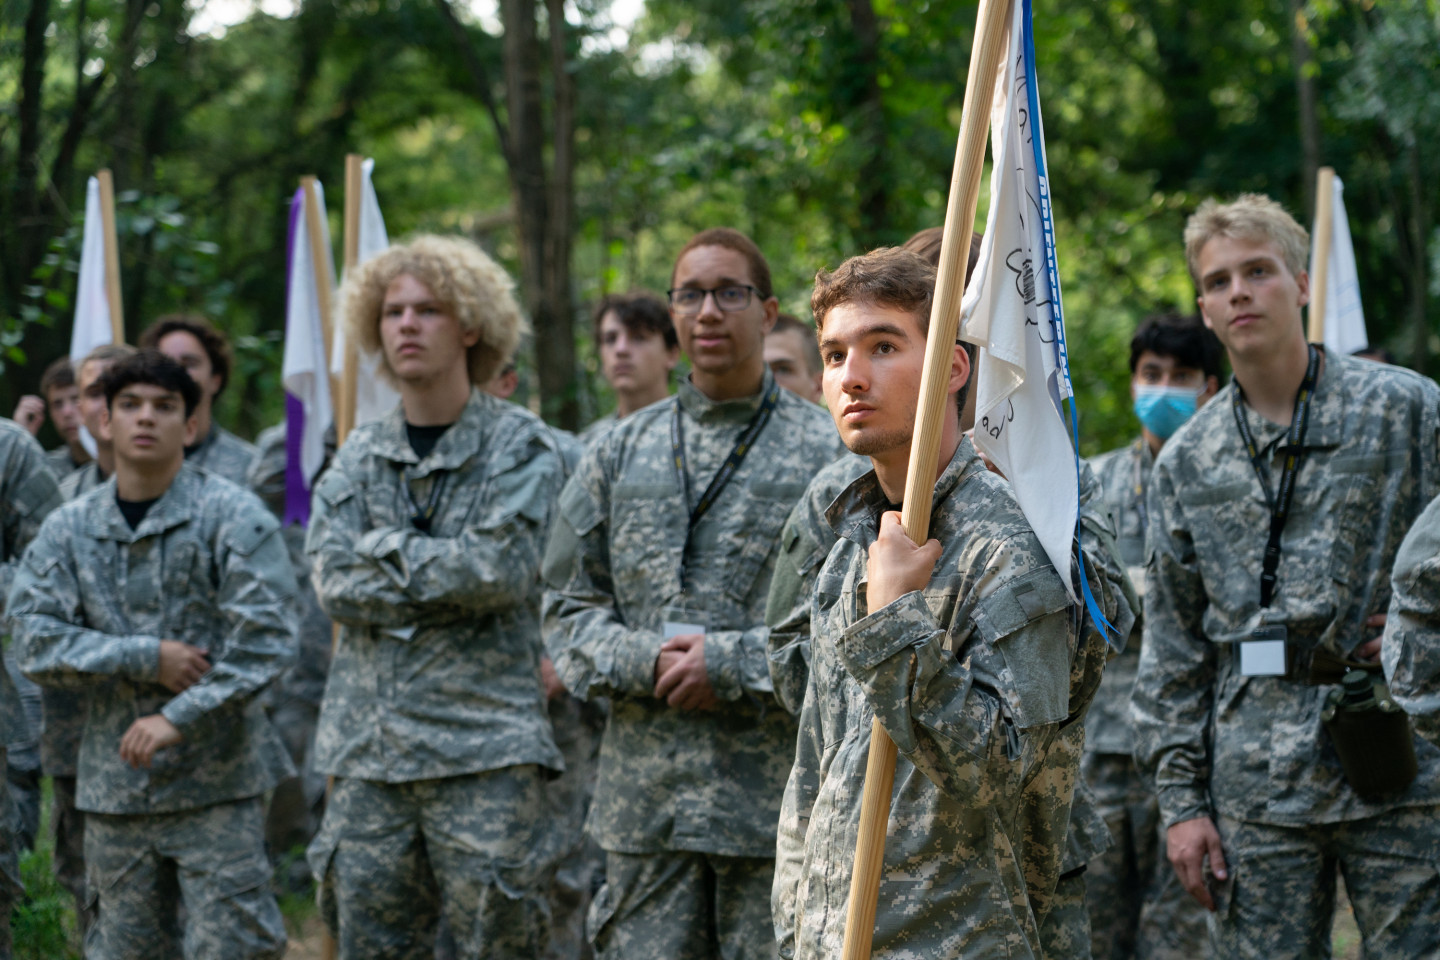 A group of teenagers dressed in Army fatigues stands together.